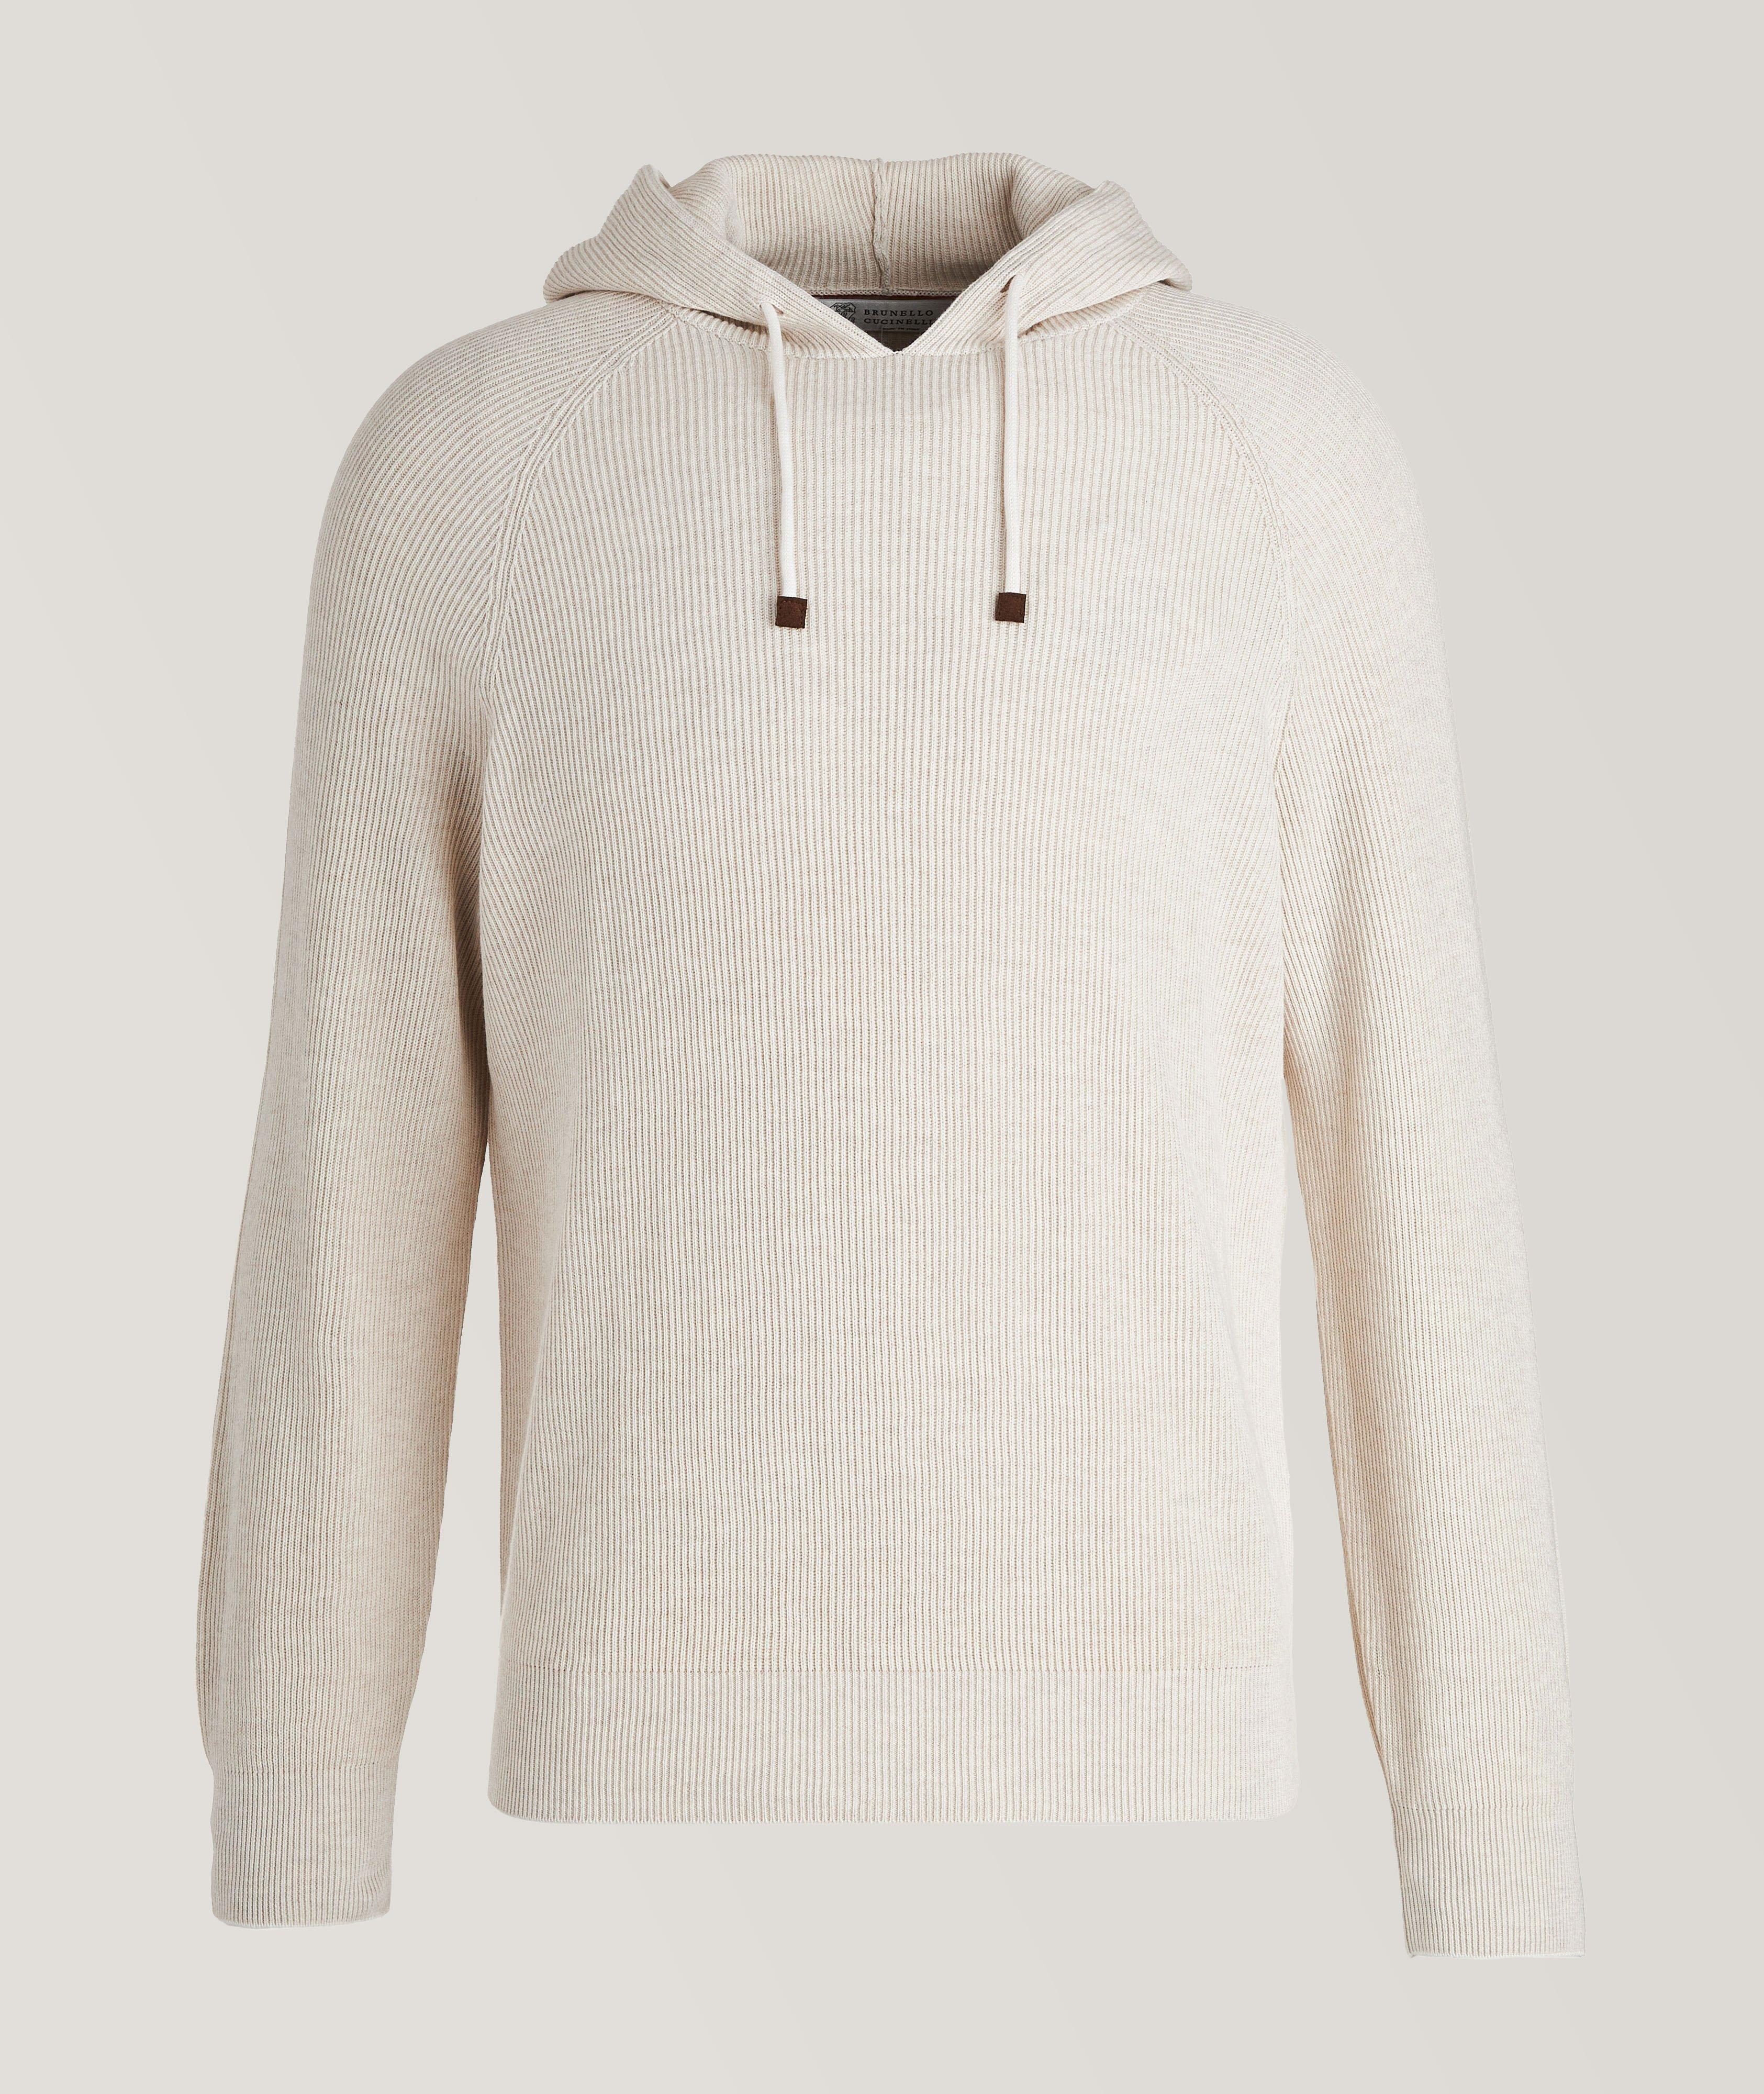 Cotton Rib Knit Hooded Pullover image 0